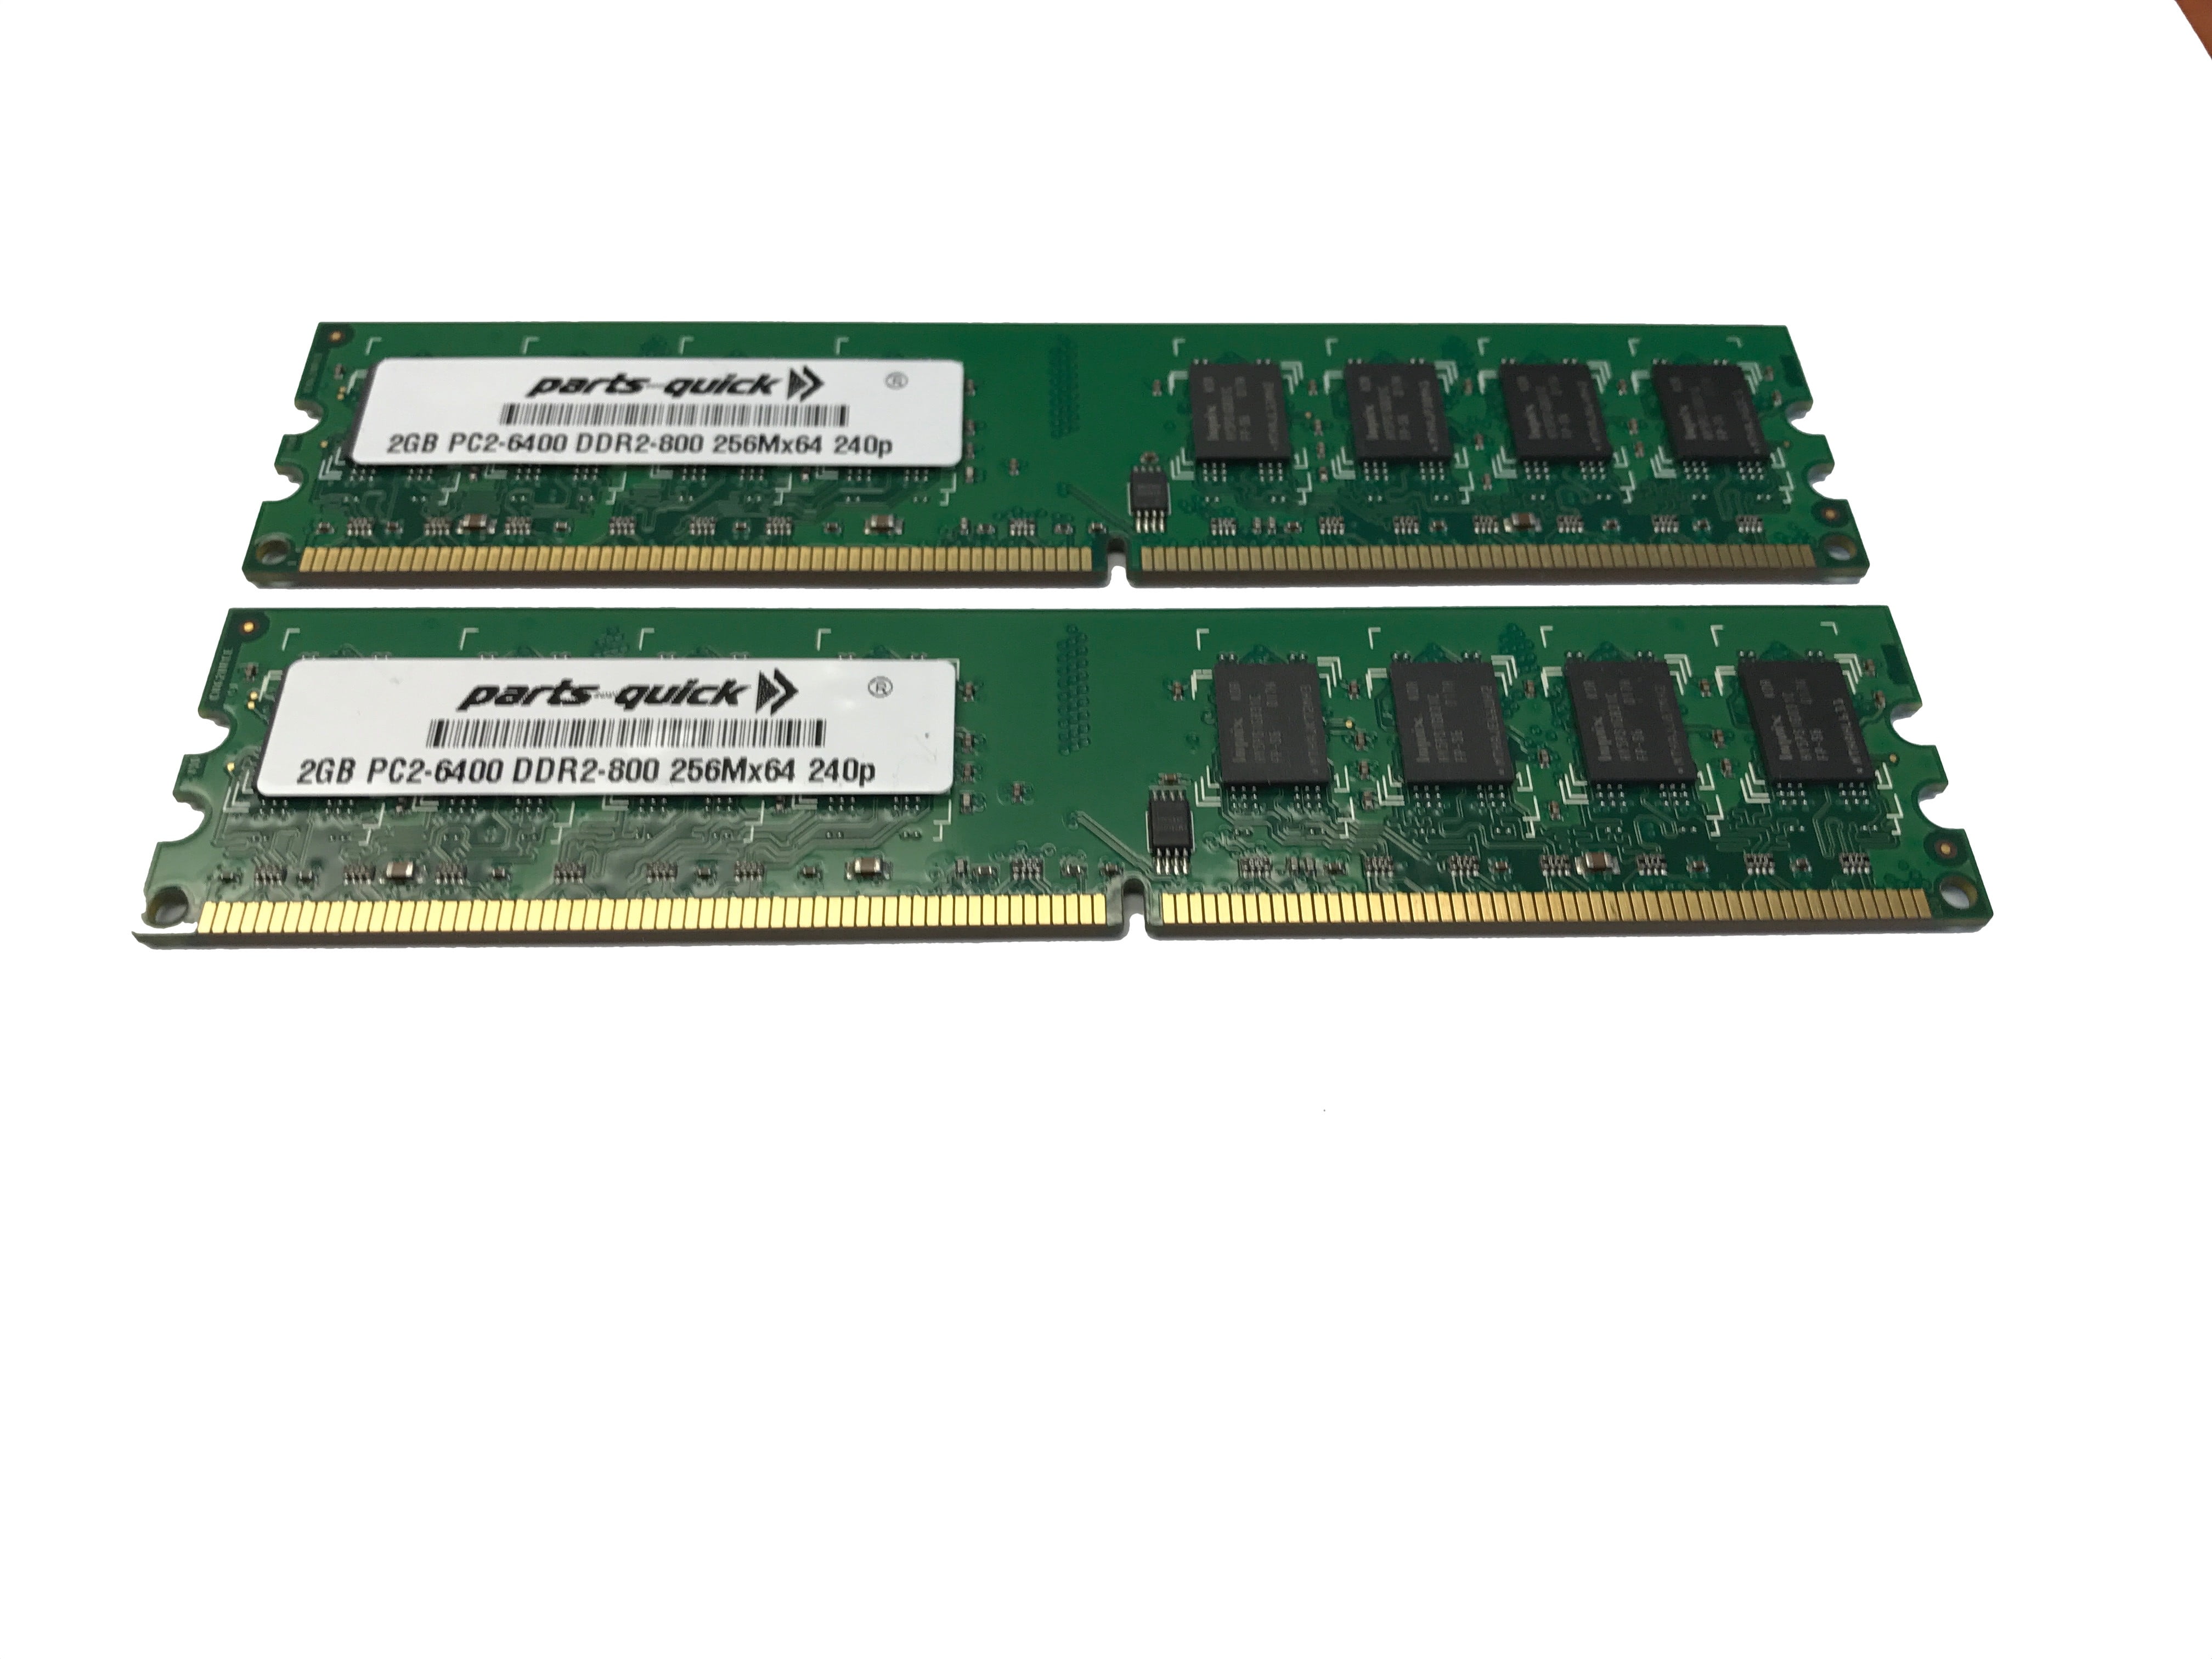 4GB (2X 2GB) Kit DDR2 PC2-6400 RAM Memory Upgrade for Dell XPS 420 625 630 630i 700 710 720 One One 24 (PARTS-QUICK) - Walmart.com